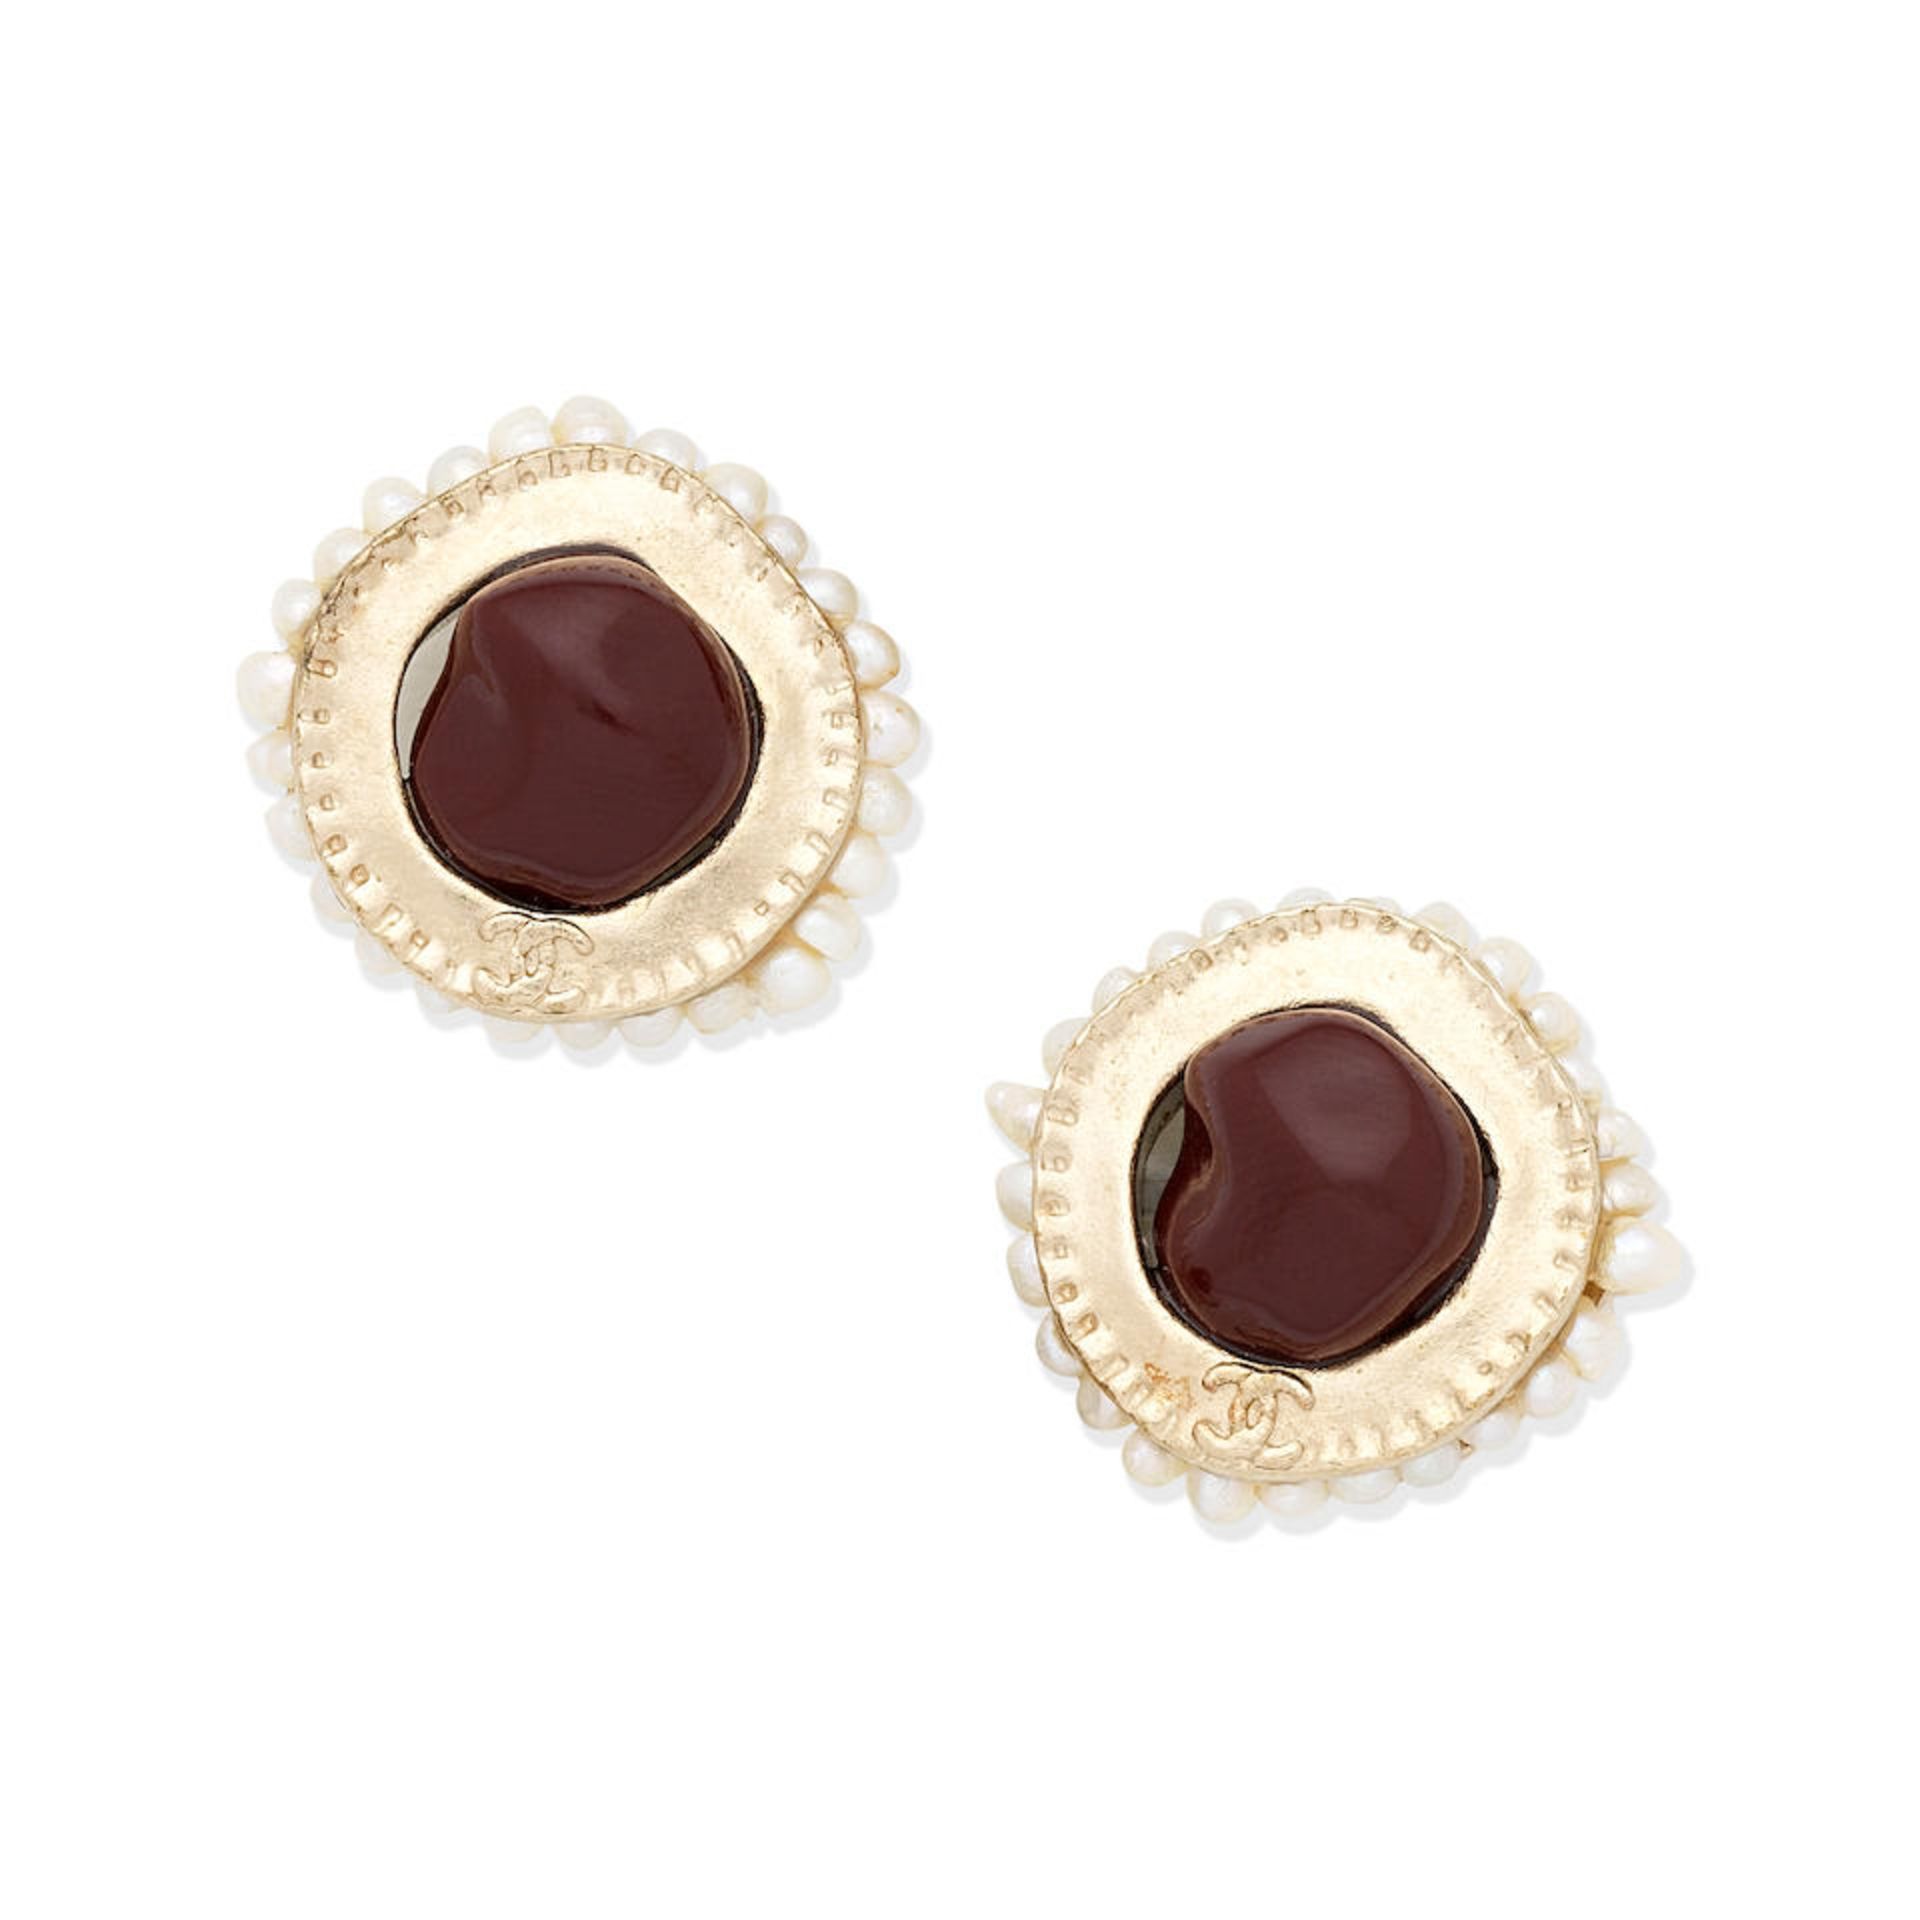 Karl Lagerfeld for Chanel: a Pair of Red Stone and Simulated Seed Pearl Earrings Autumn 2013 (in...